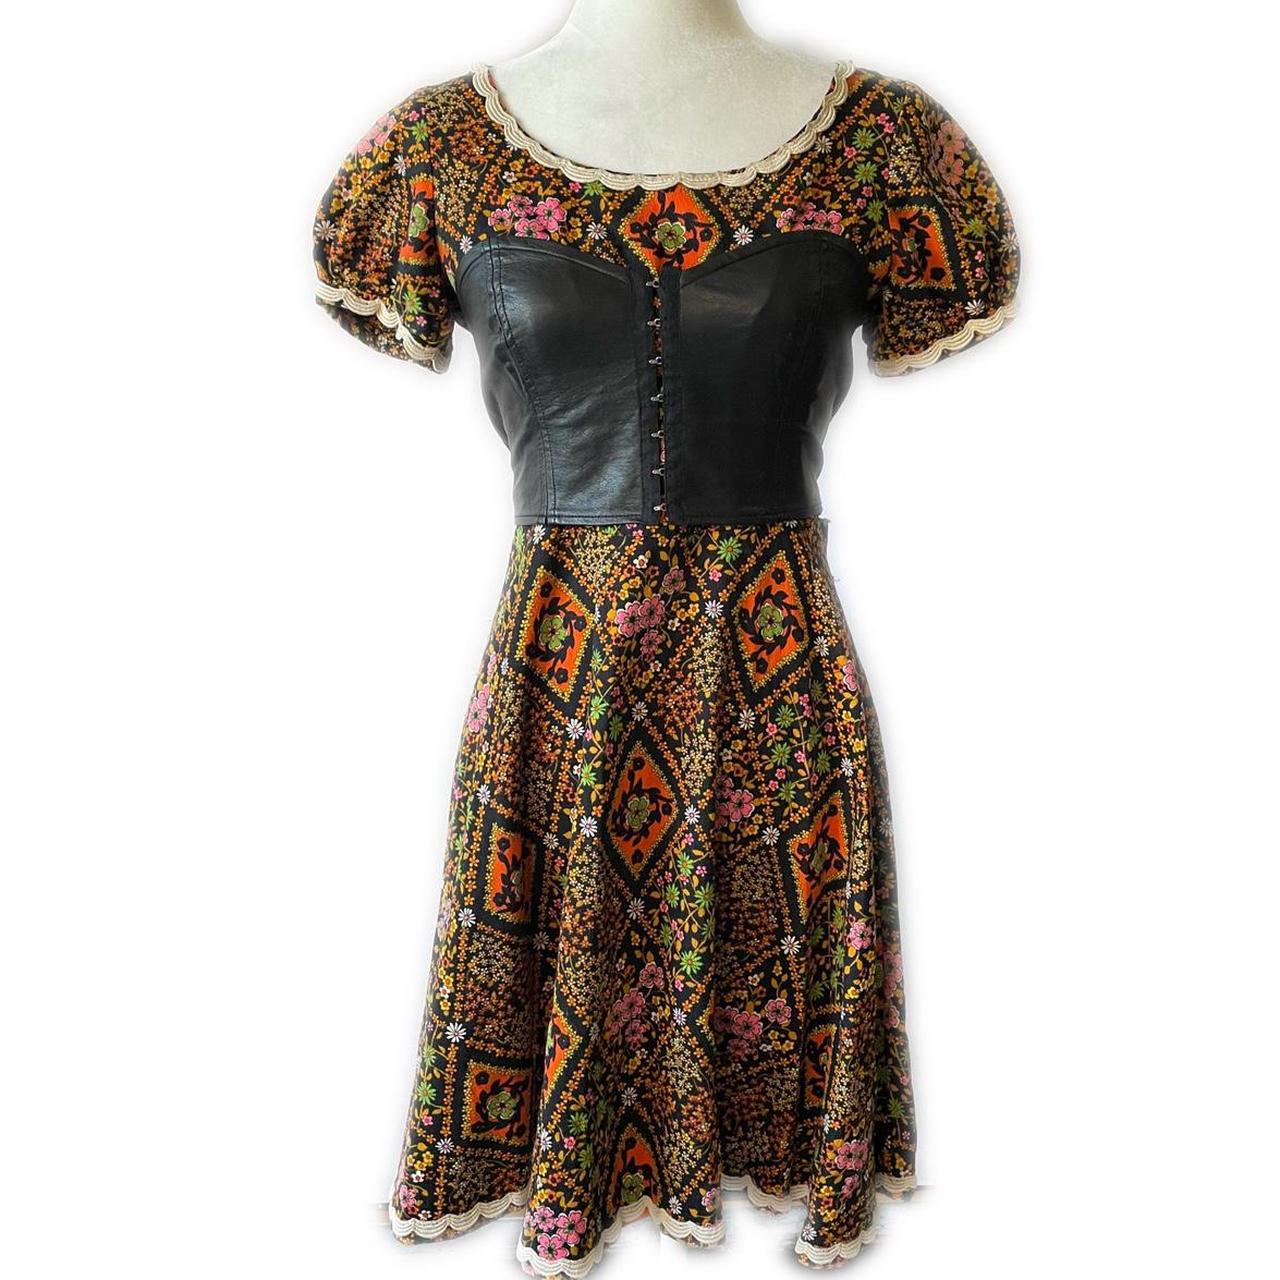 Product Image 1 - Adorable vintage 1960s // 70s